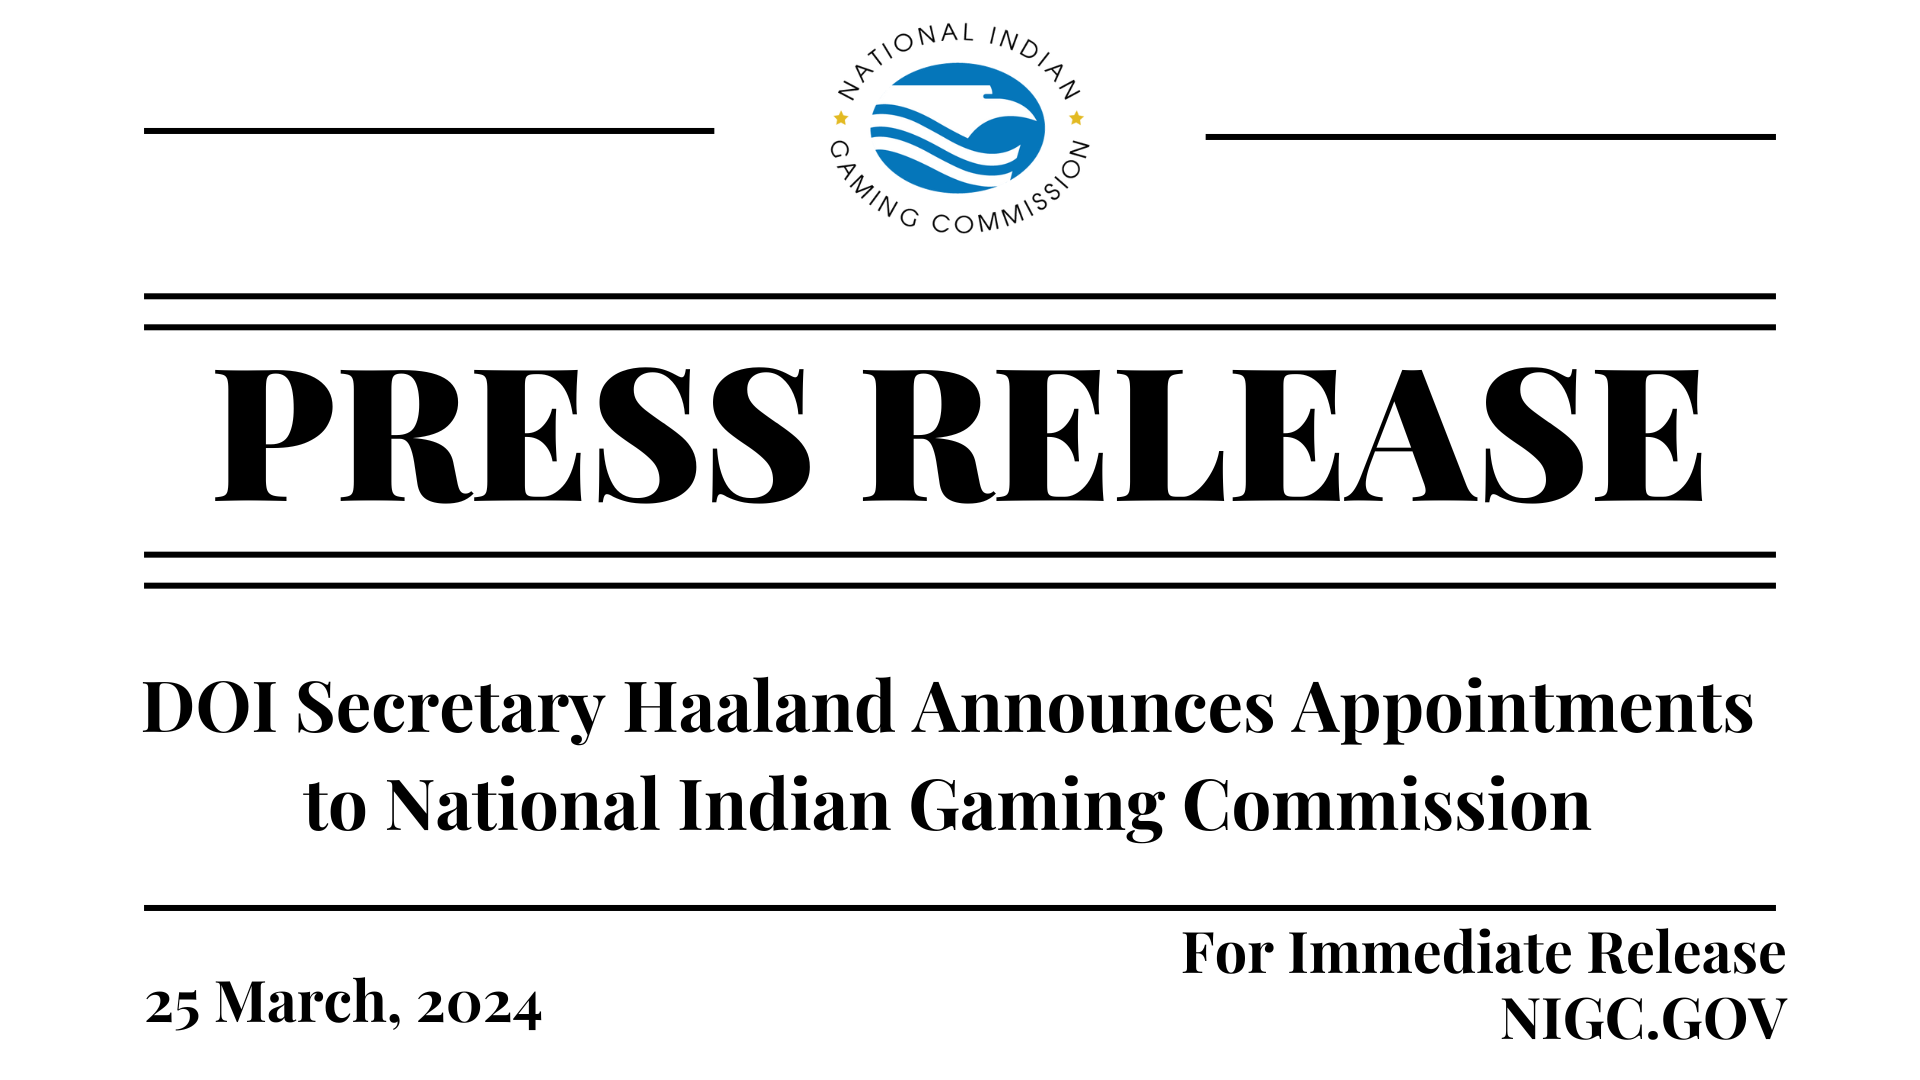 Secretary Haaland Announces Appointments to National Indian Gaming Commission